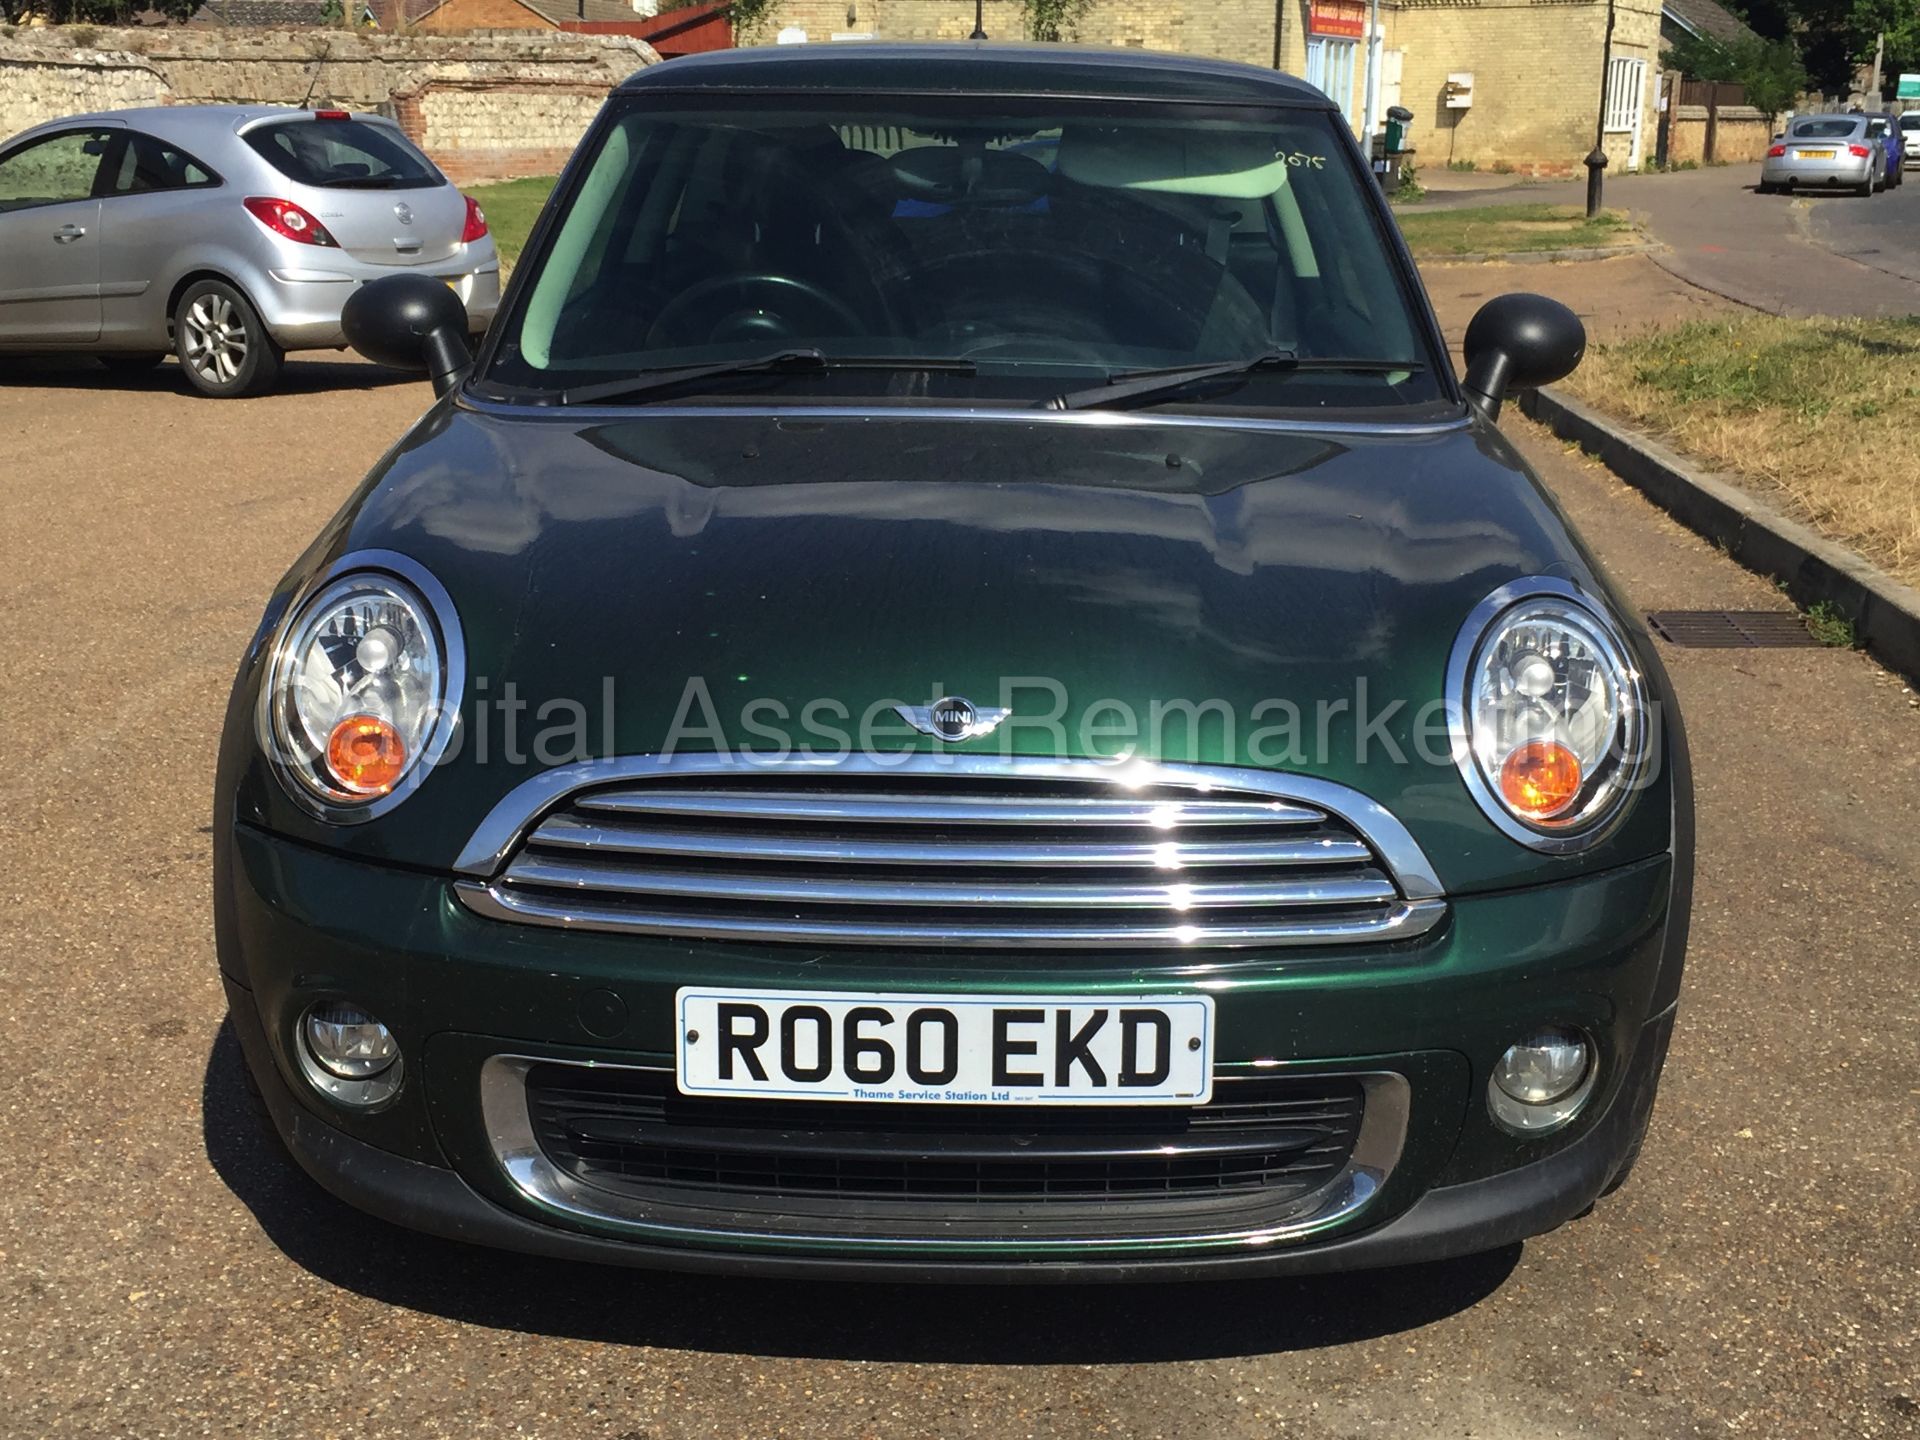 (ON SALE) MINI 'ONE EDITION' (2011 MODEL) '3 DOOR HATCHBACK' '1.6 PETROL - 6 SPEED - AIR CON' - Image 3 of 21